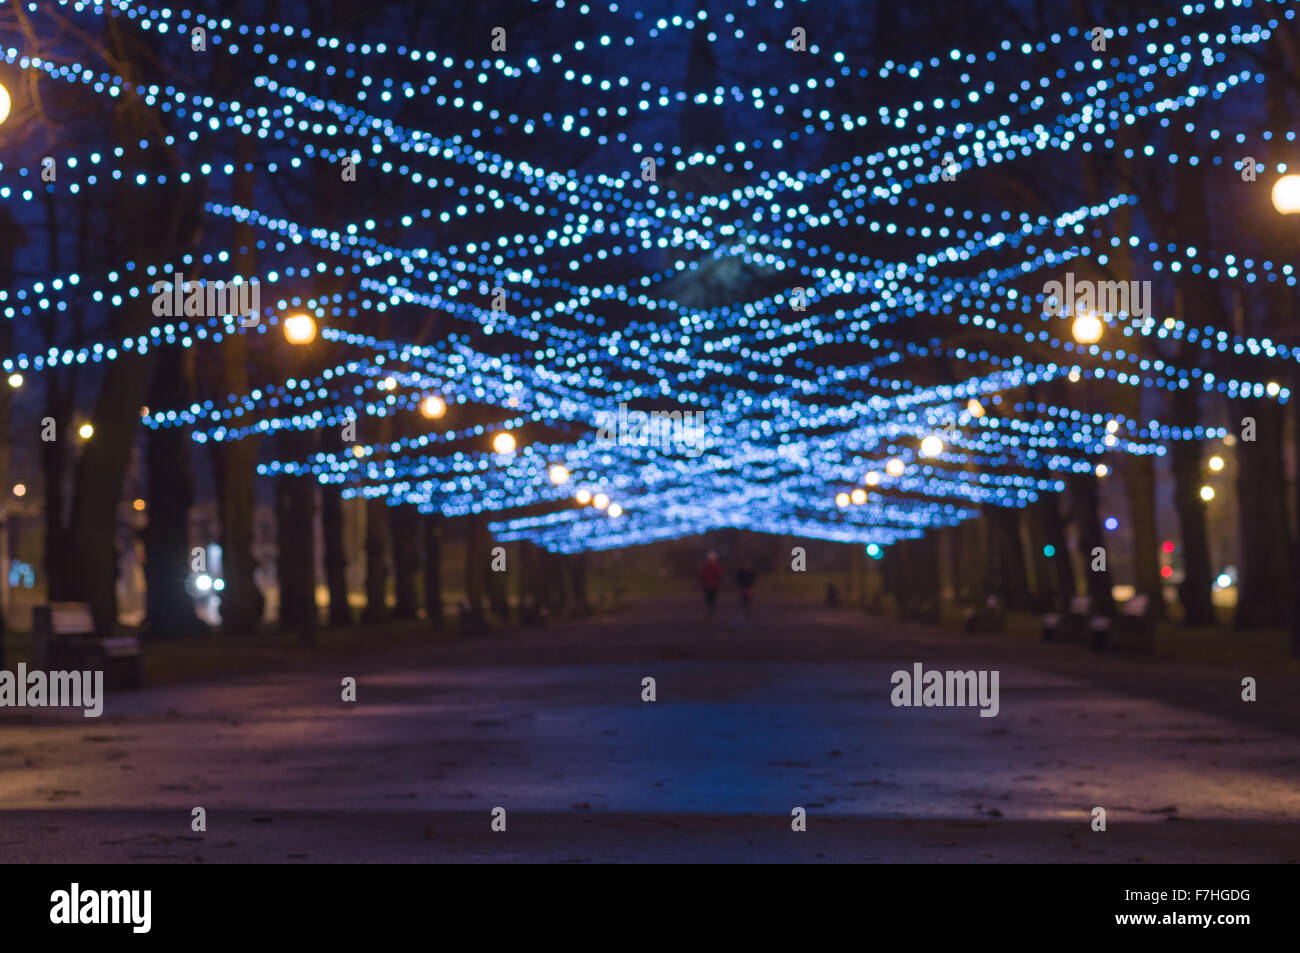 Blurred image of New Year and Christmas lighting decoration of city boulevard Stock Photo